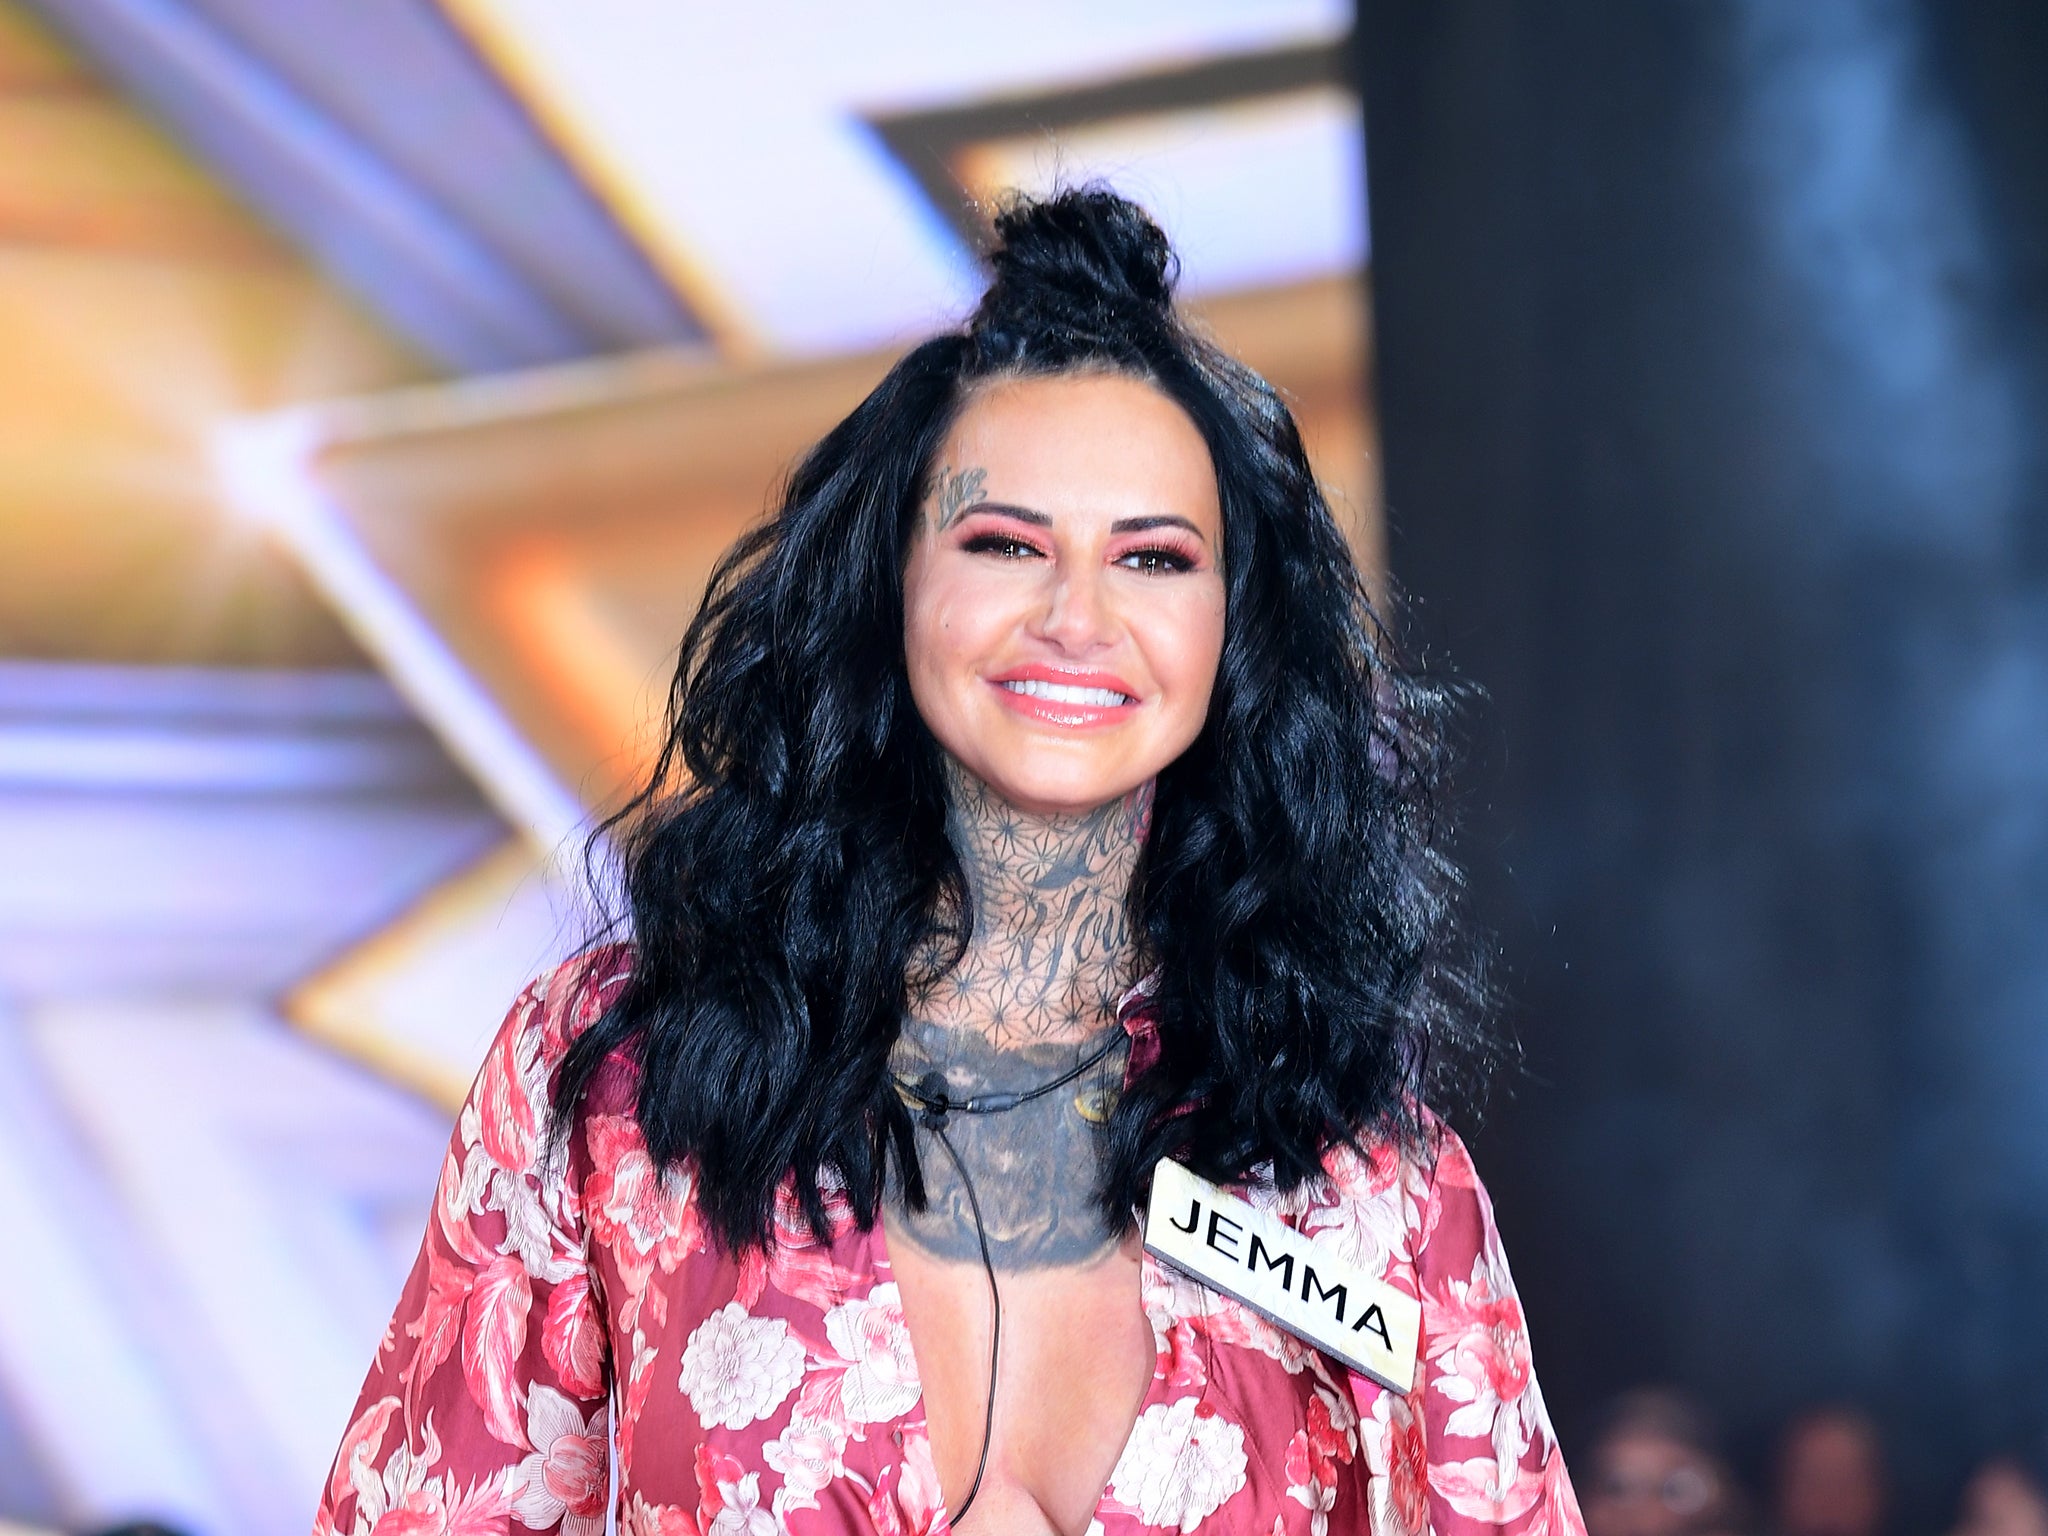 Jemma Lucy is a former glamour model